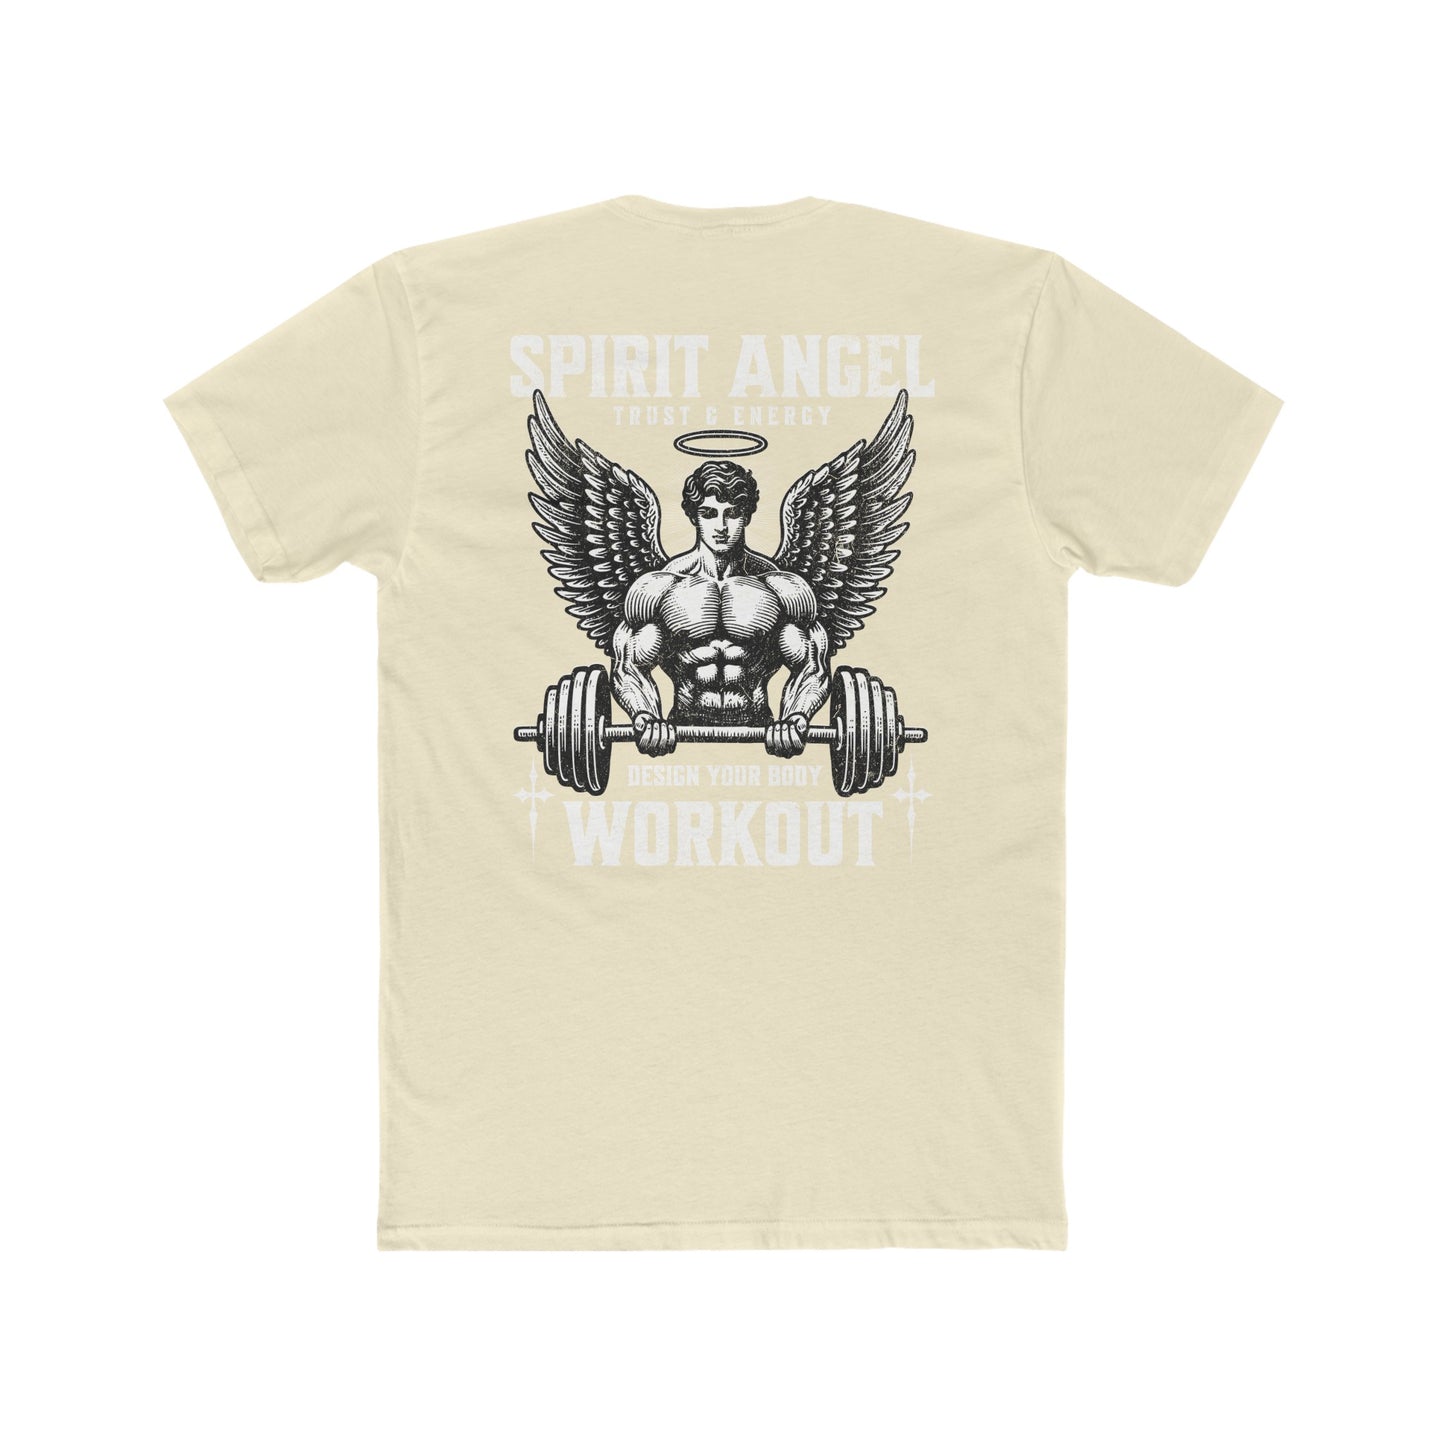 Men's Cotton Crew Tee - "Spirit Angel Trust and Energy Design Your Body and Work Out": Motivate Your Fitness Journey